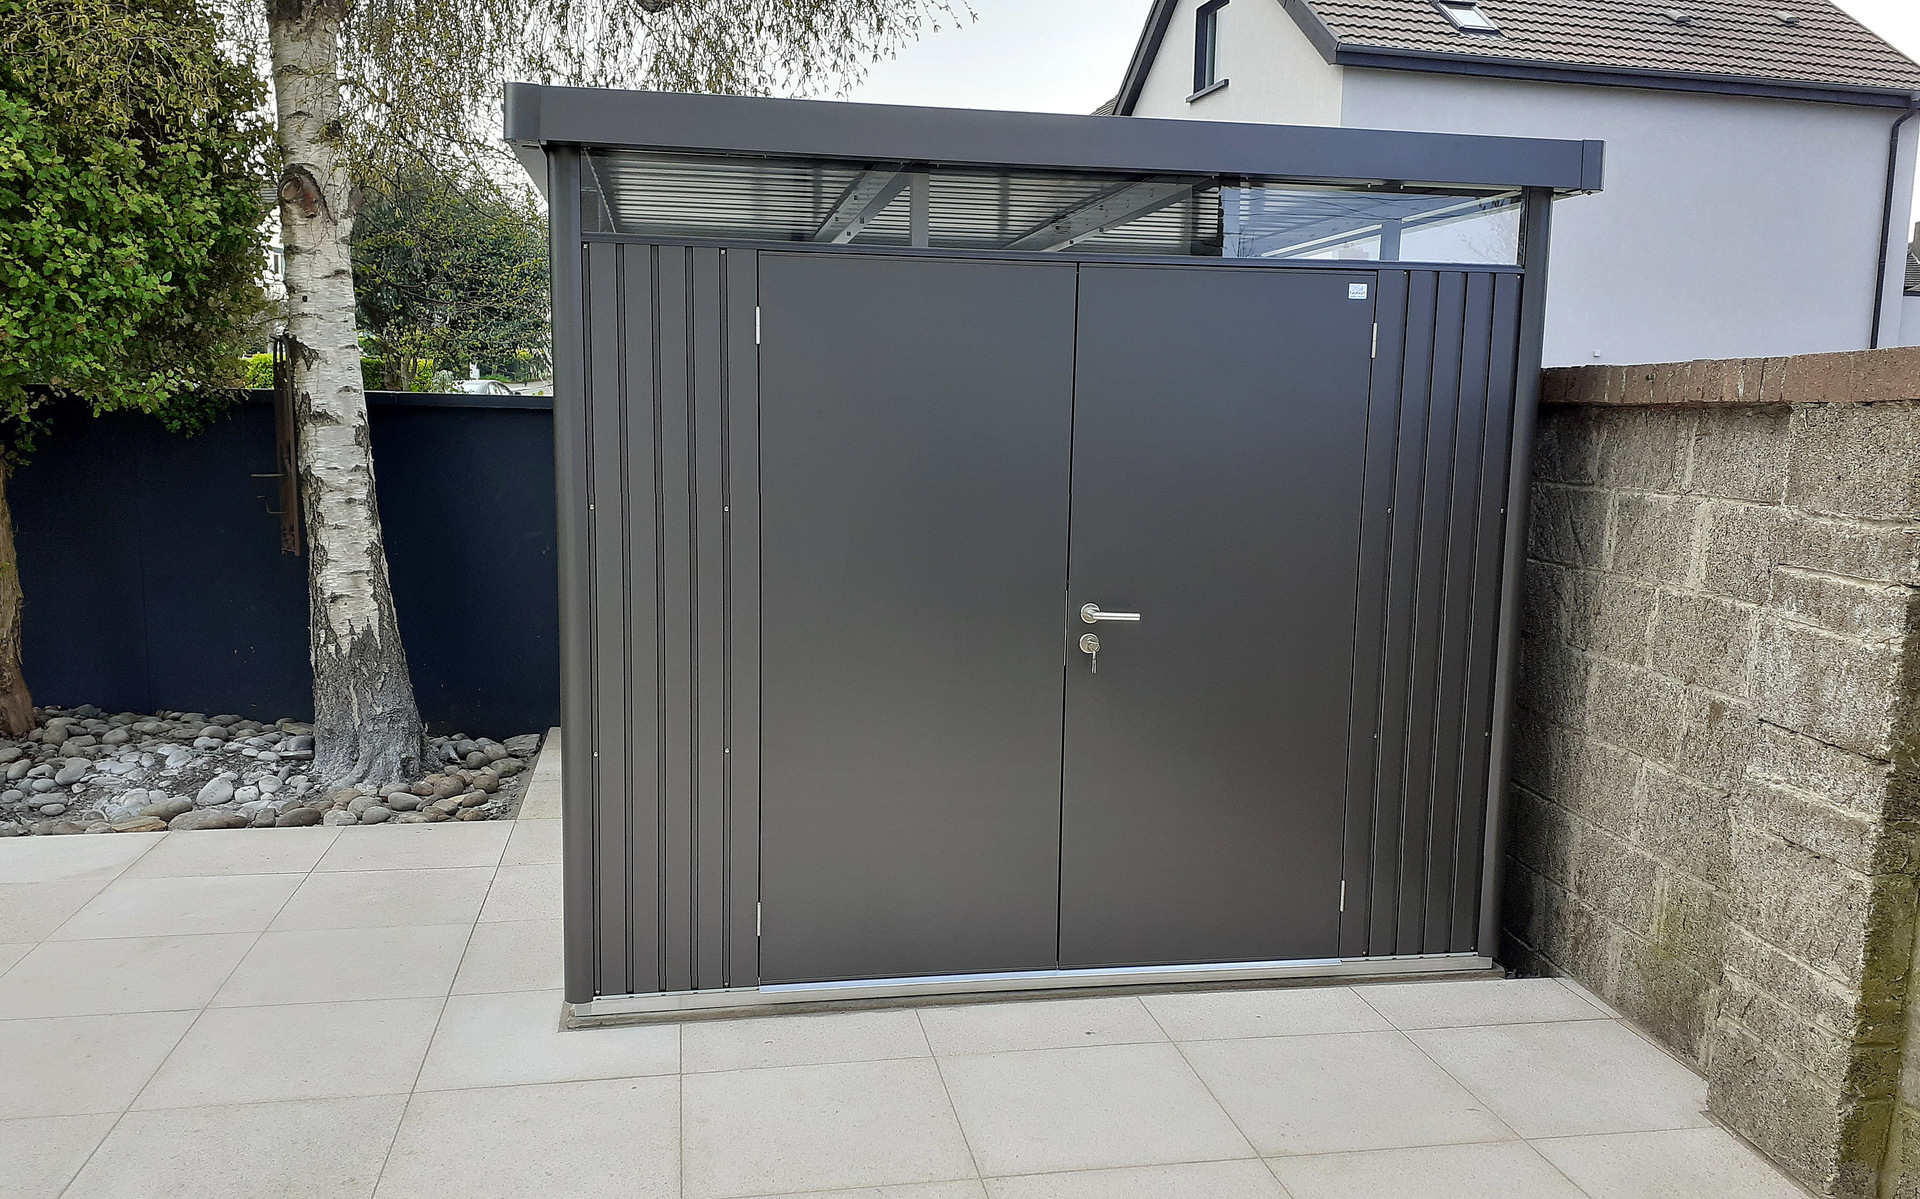 Biohort HighLine H5 Steel Garden Sheds | The stylish & secure way to store your garden items